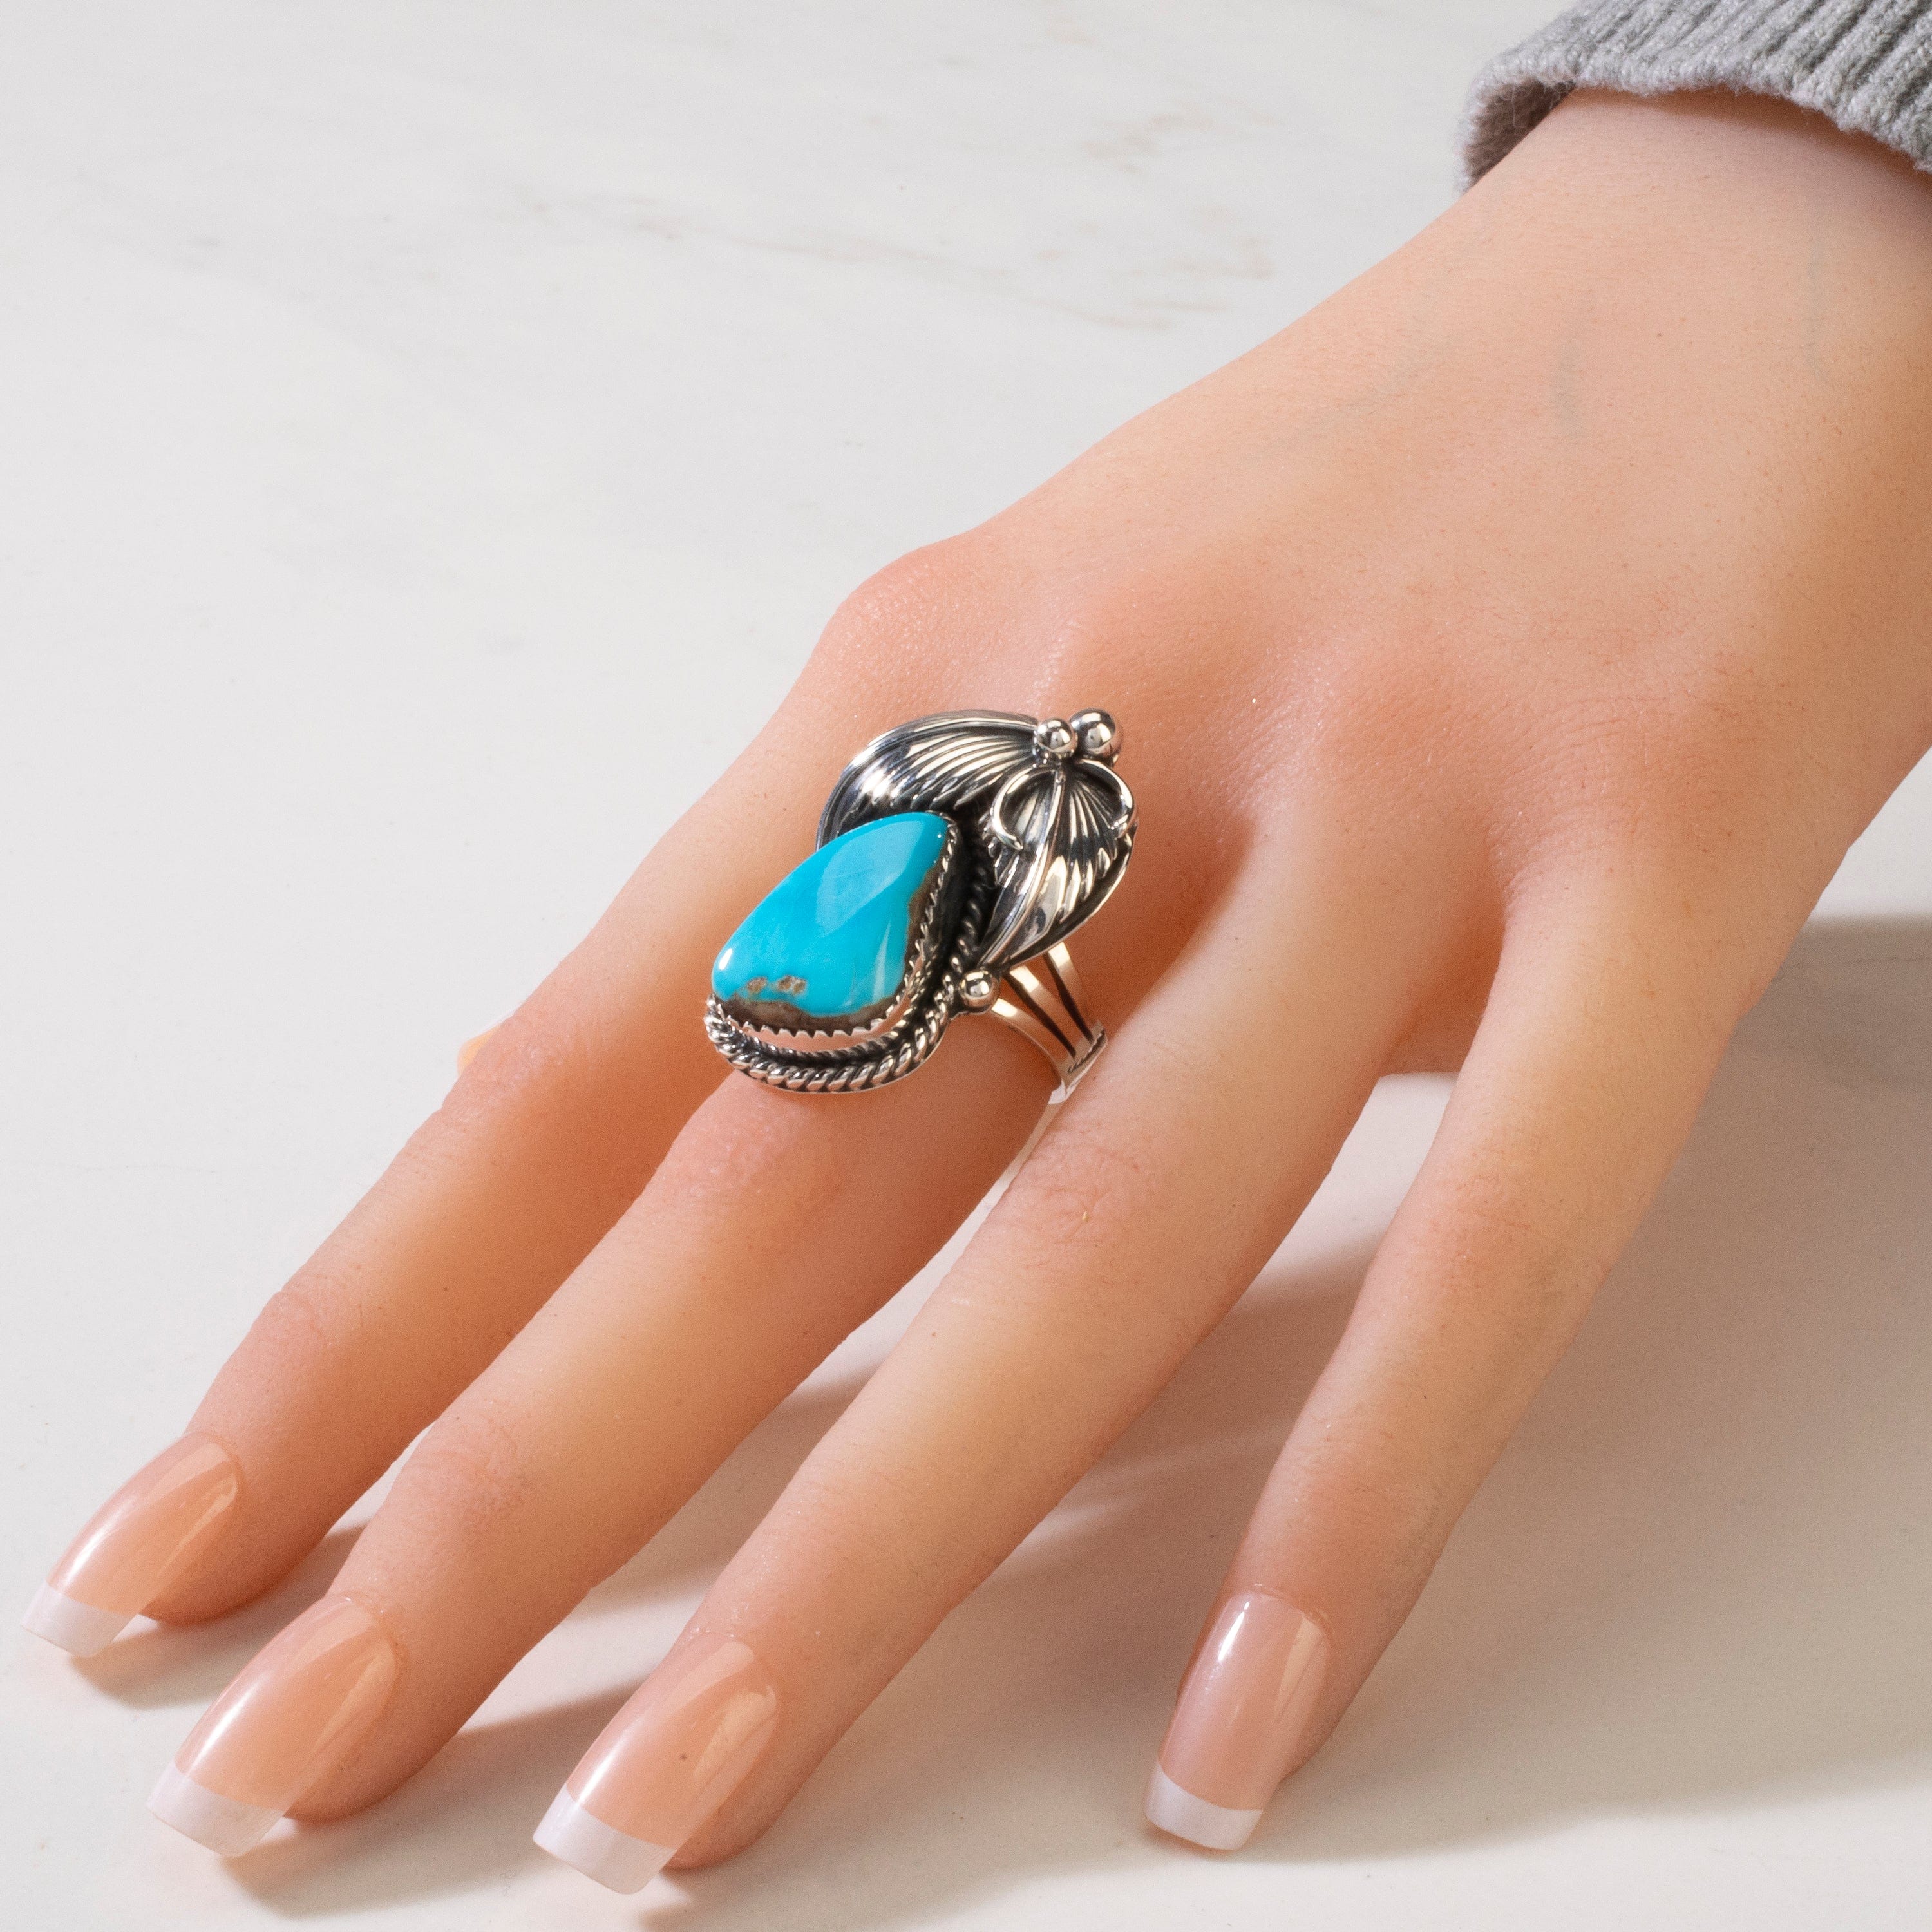 Kalifano Native American Jewelry 6 Joe Piaso Jr. Sleeping Beauty Turquoise Feather Navajo USA Native American Made 925 Sterling Silver Ring NAR700.033.6